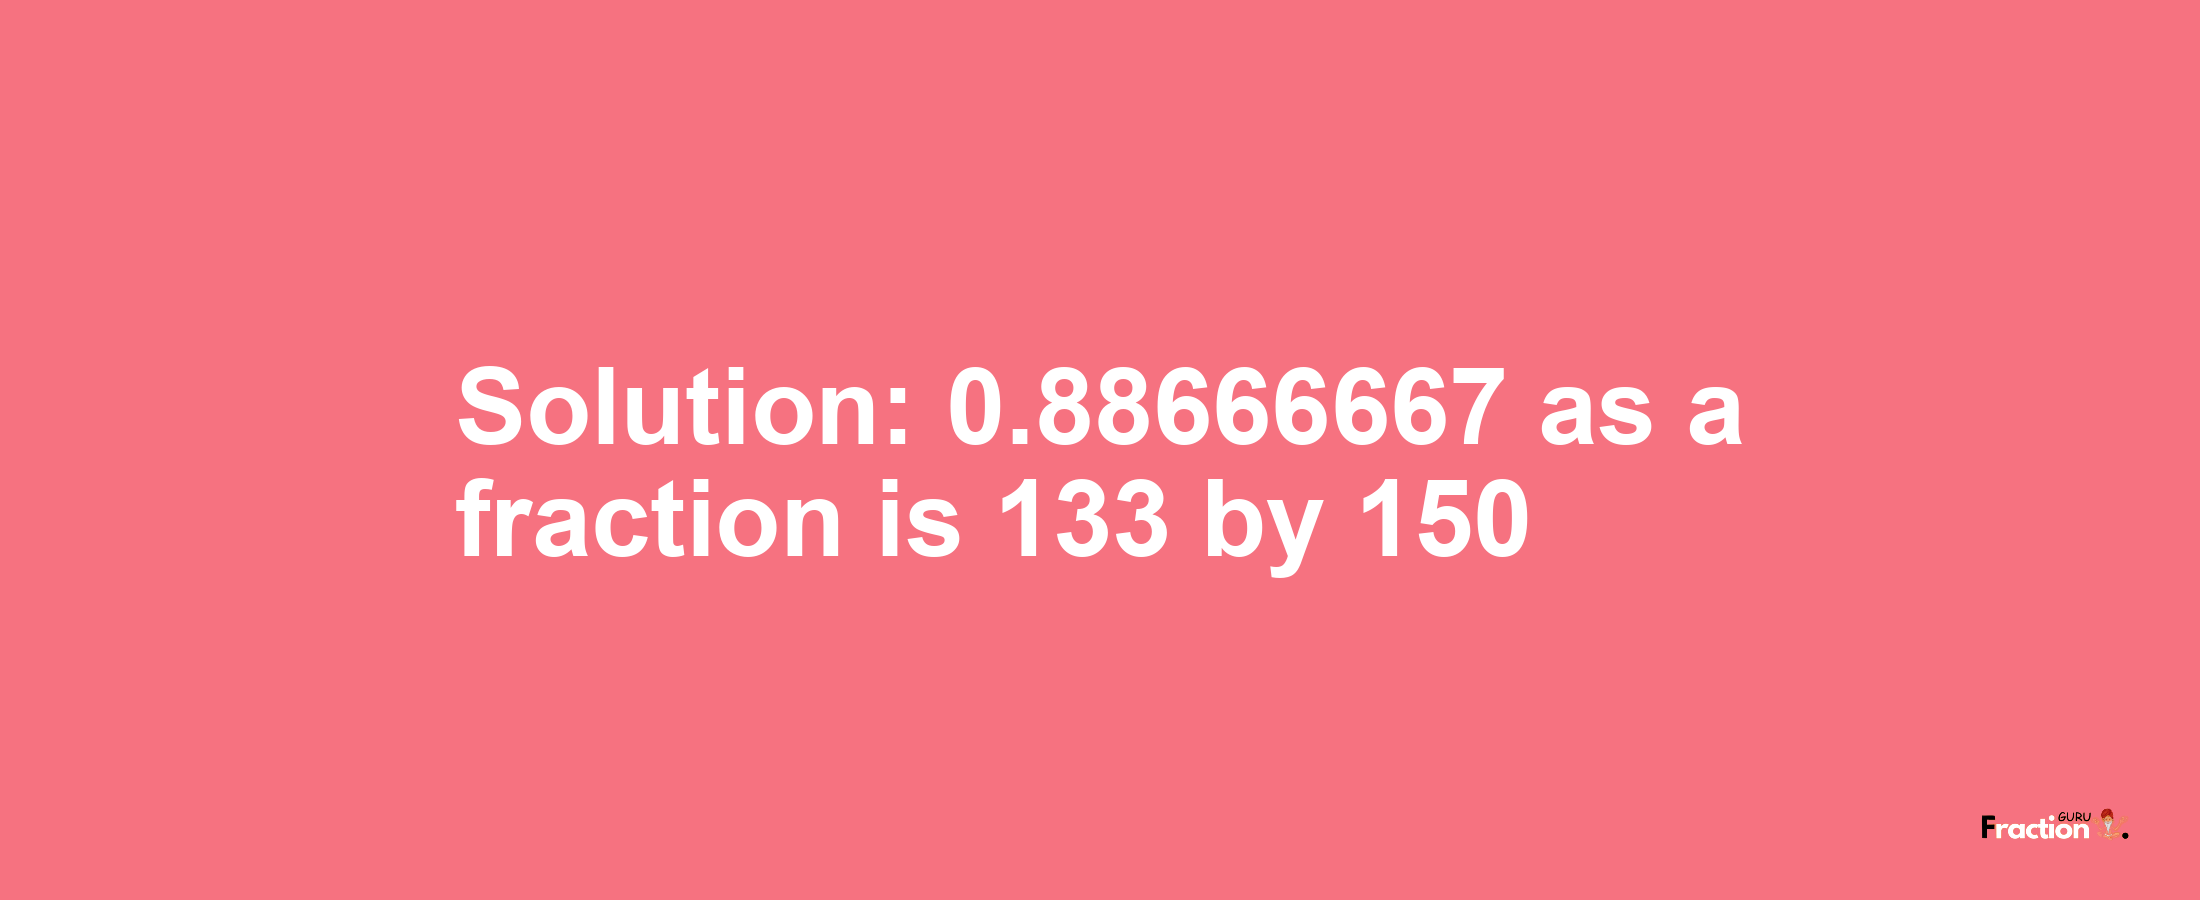 Solution:0.88666667 as a fraction is 133/150